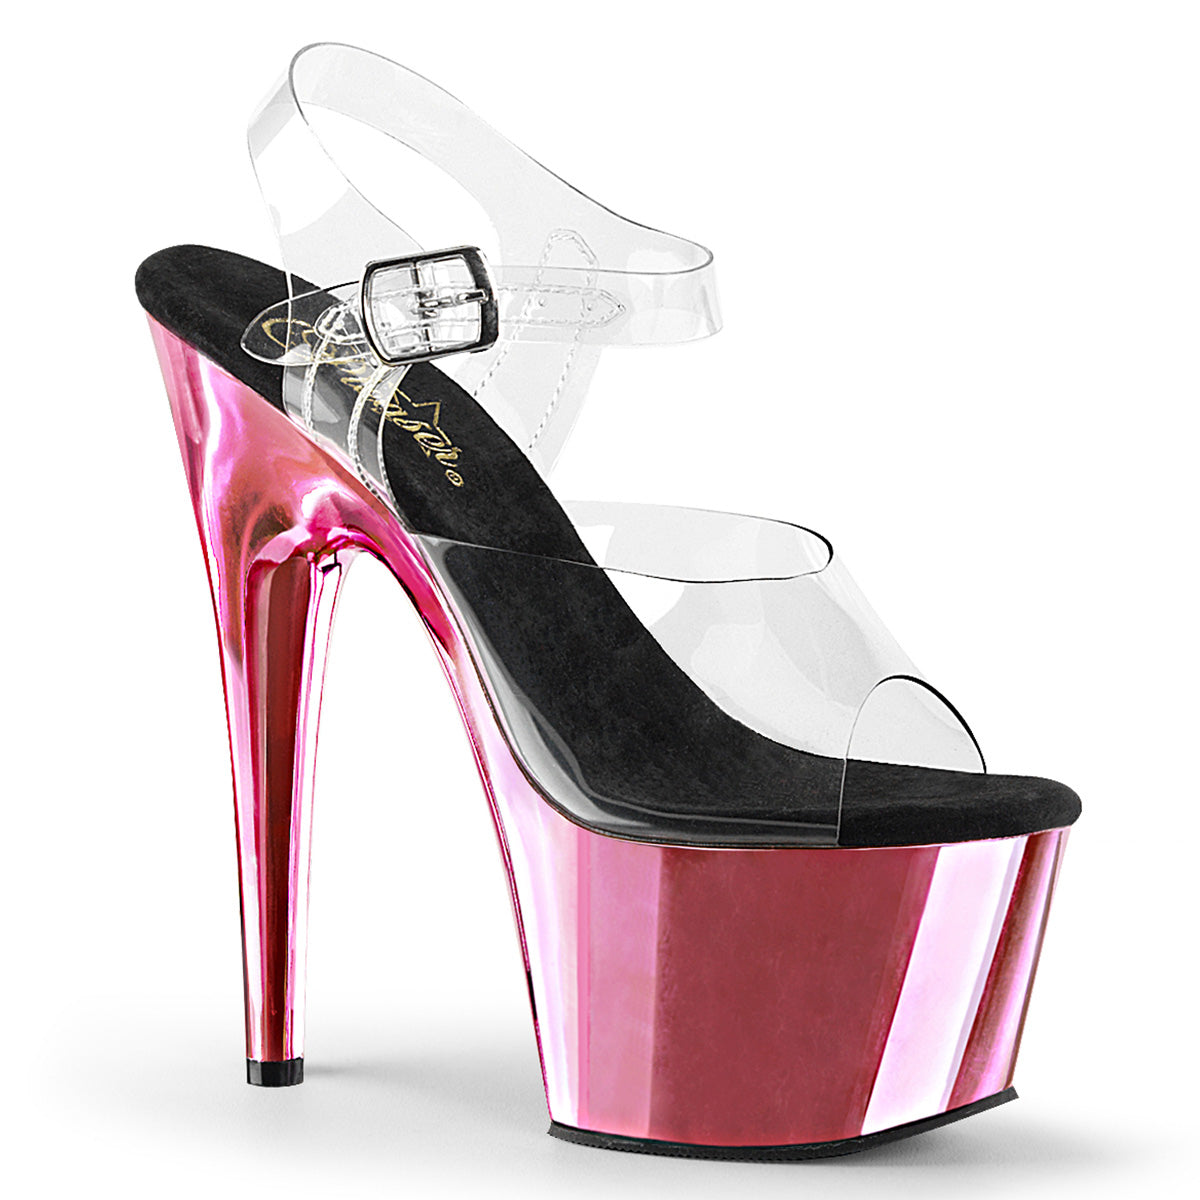 ADORE-708 7" Heel Clear & Baby Pink Chrome Pole Dancer Shoes